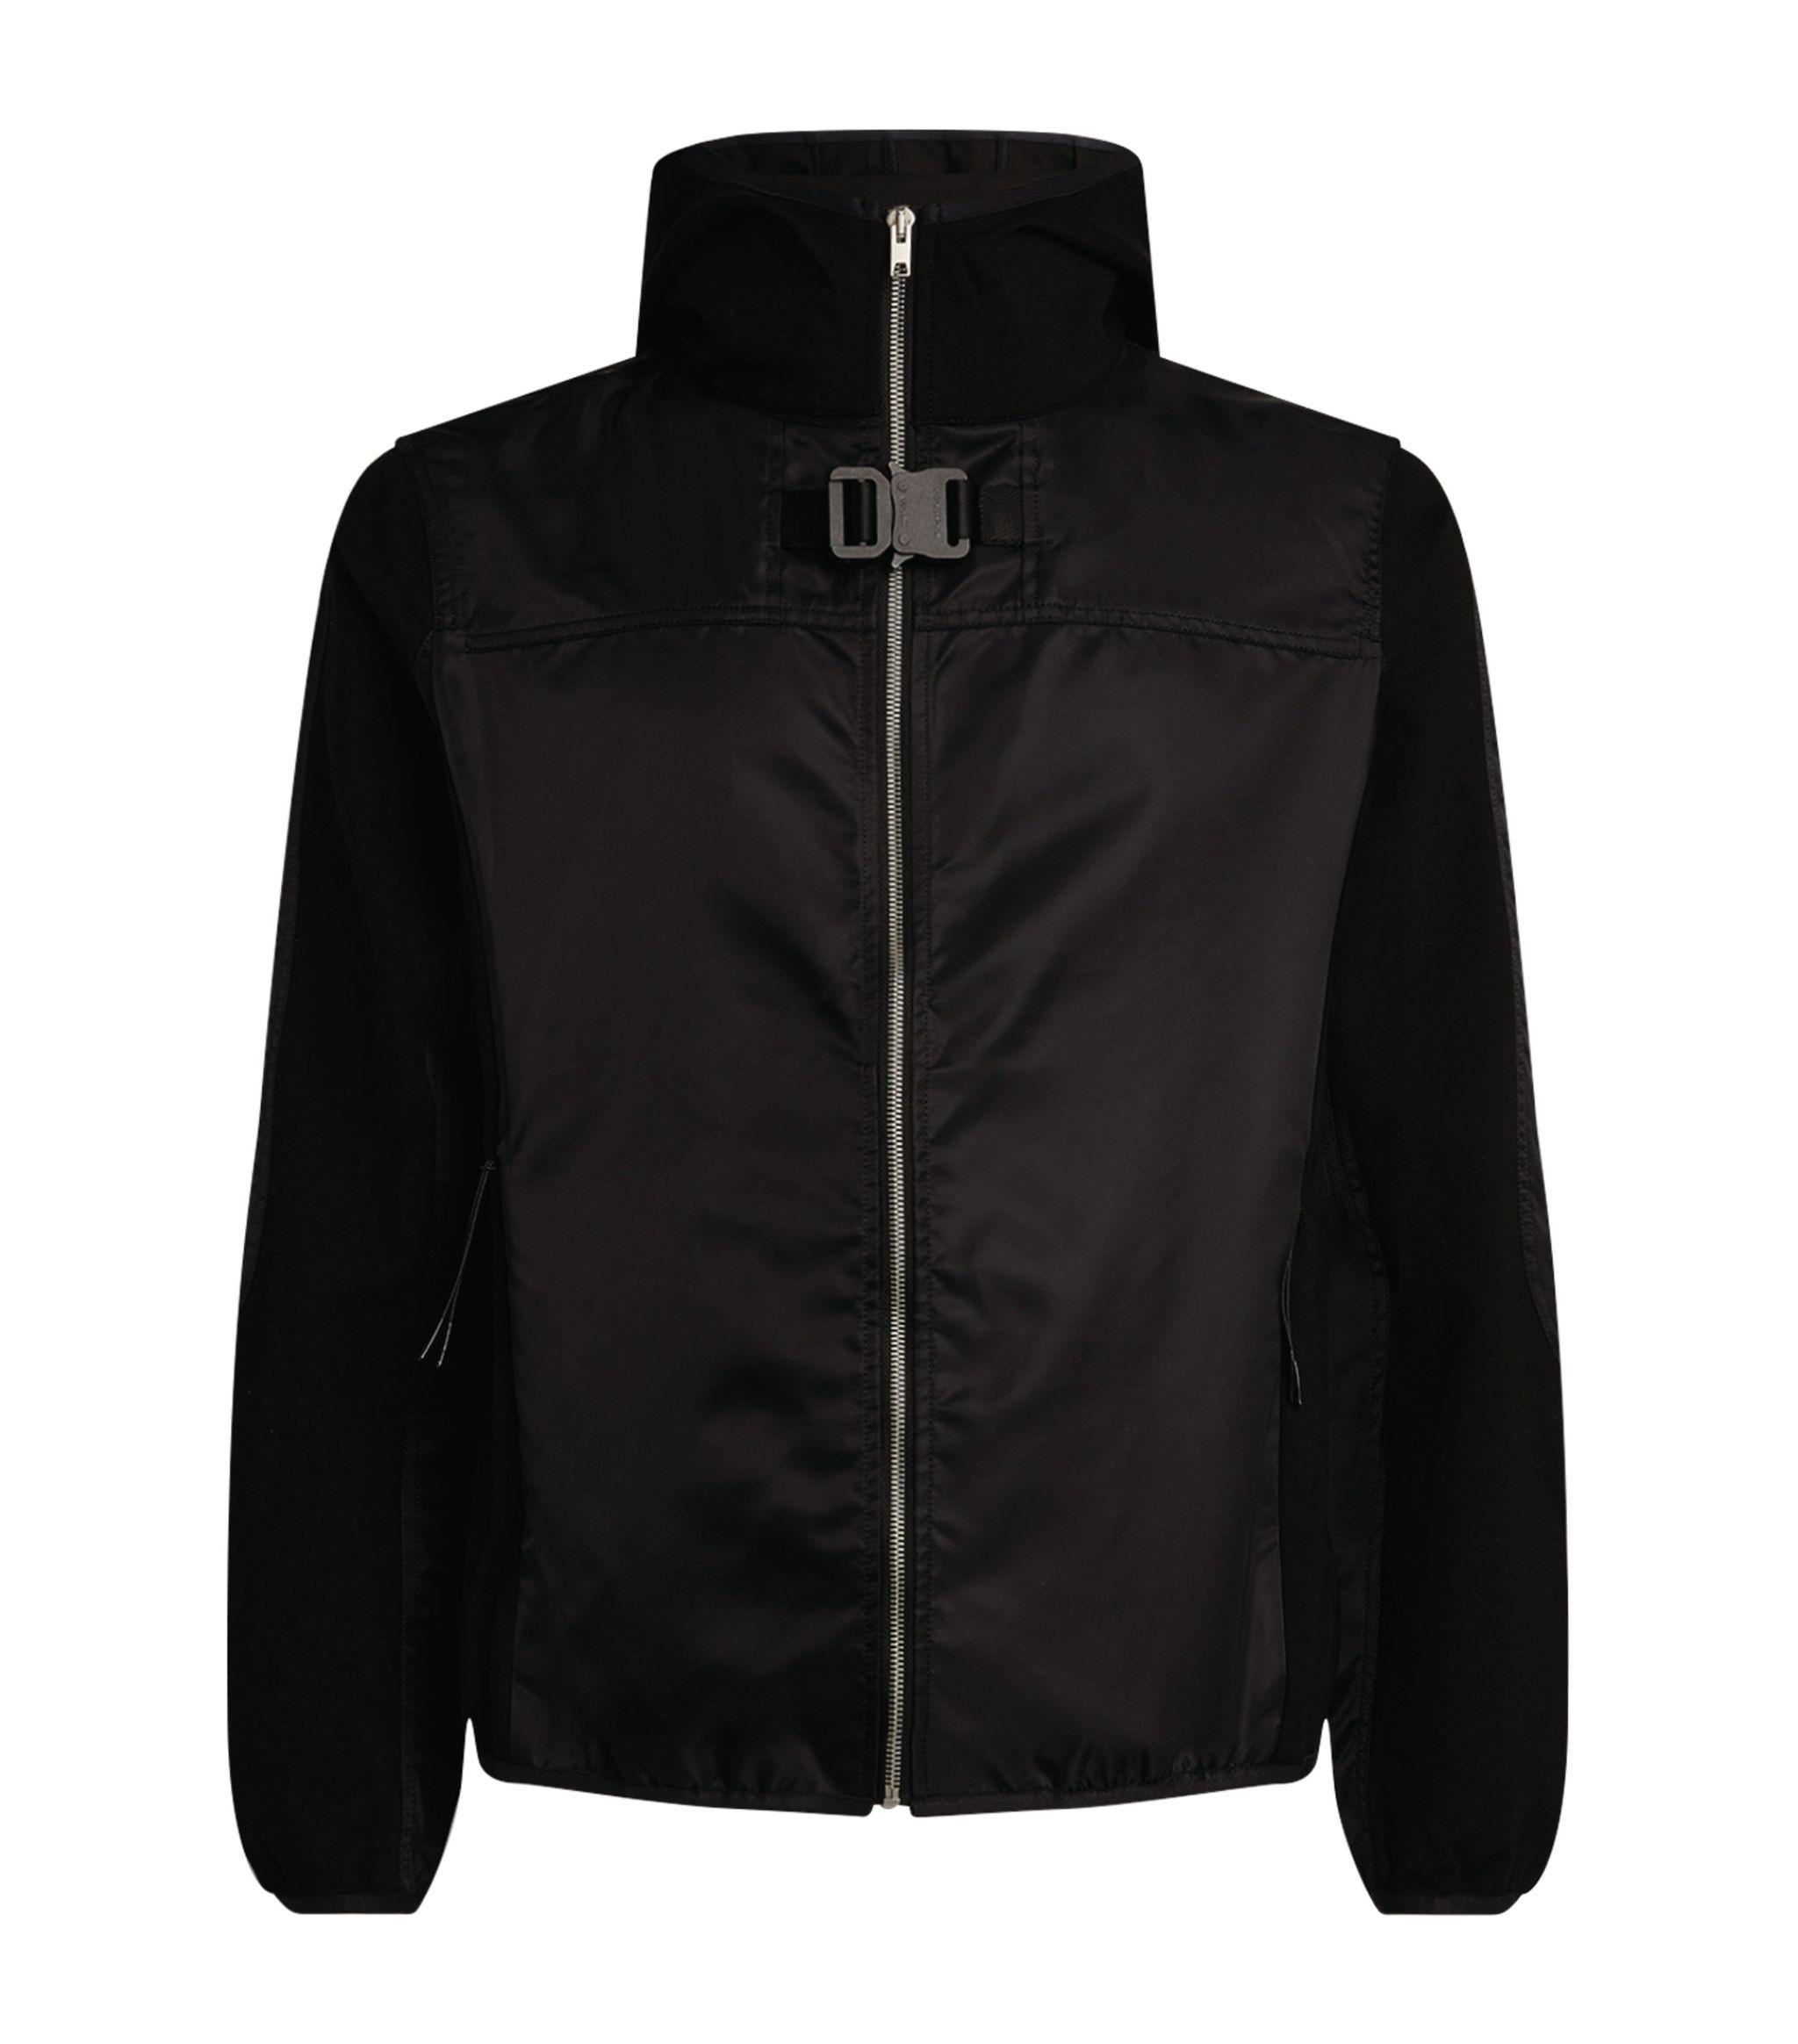 1017 ALYX 9SM Synthetic Hooded Buckle Jacket in Black for Men - Lyst